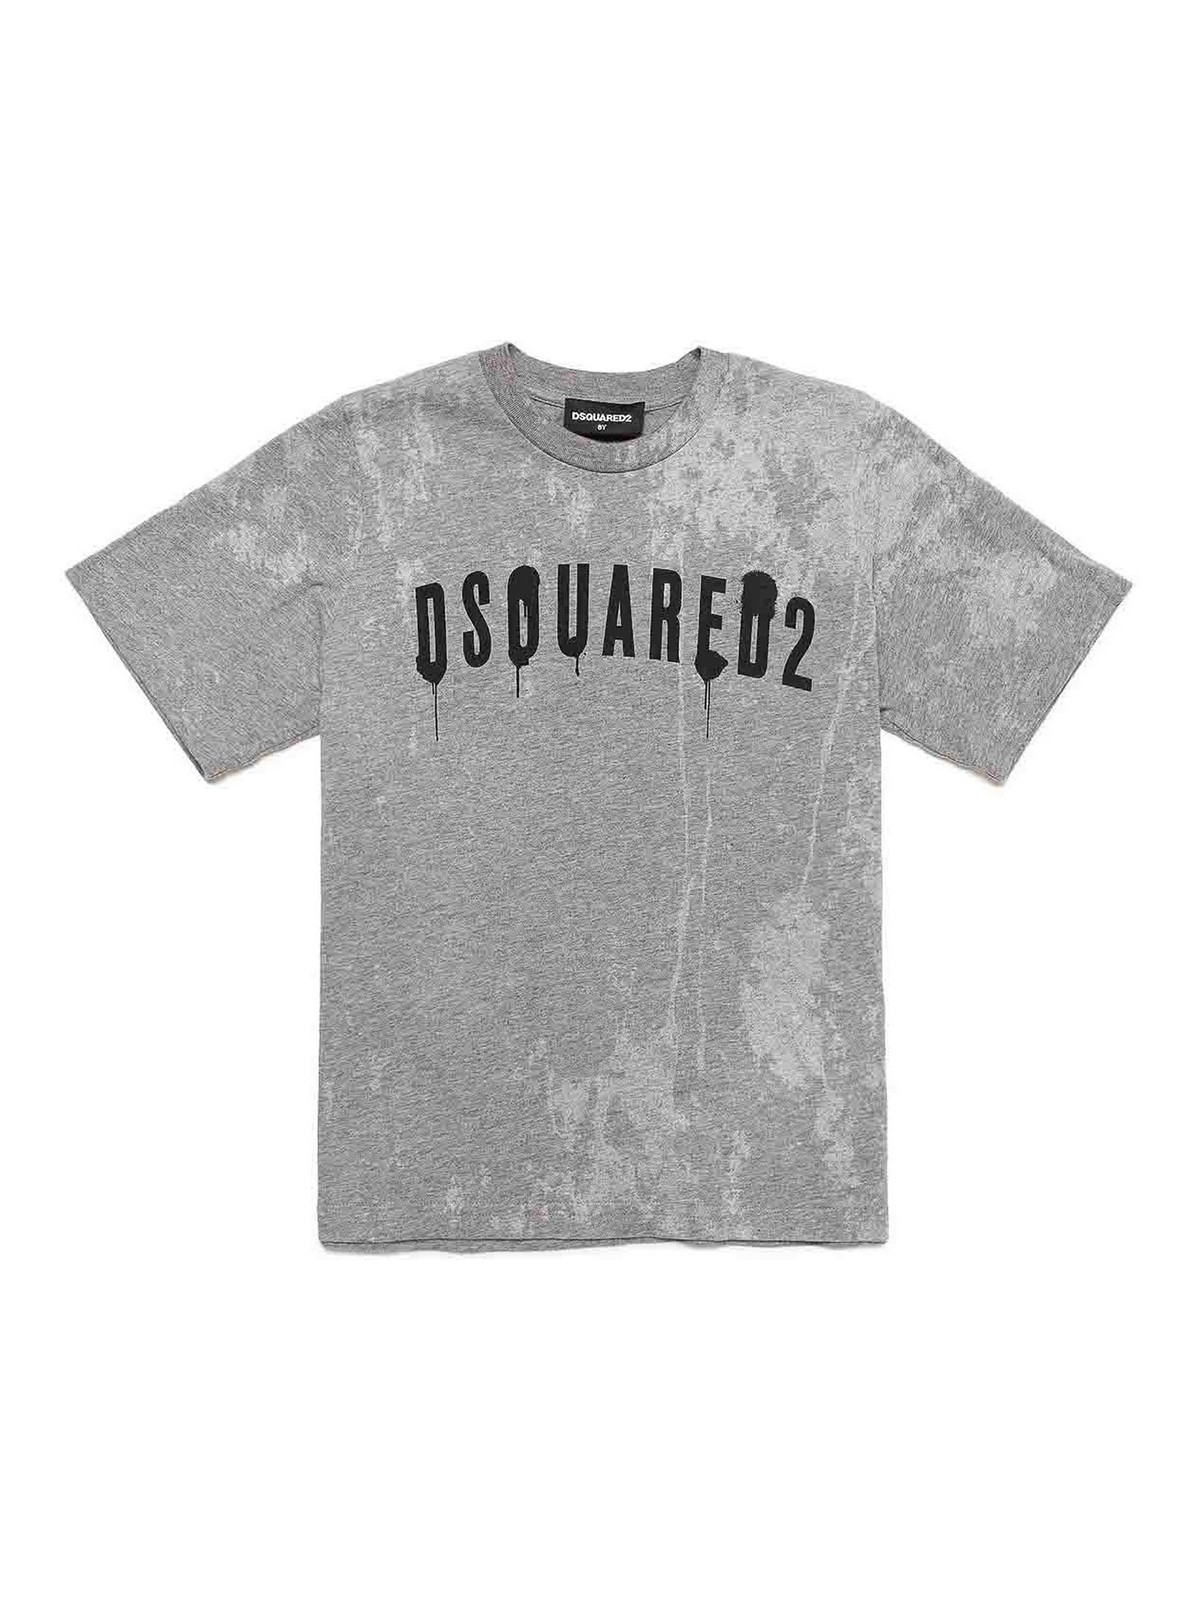 Dsquared2 Kids' Gray Half Sleeve T-shirt In Grey